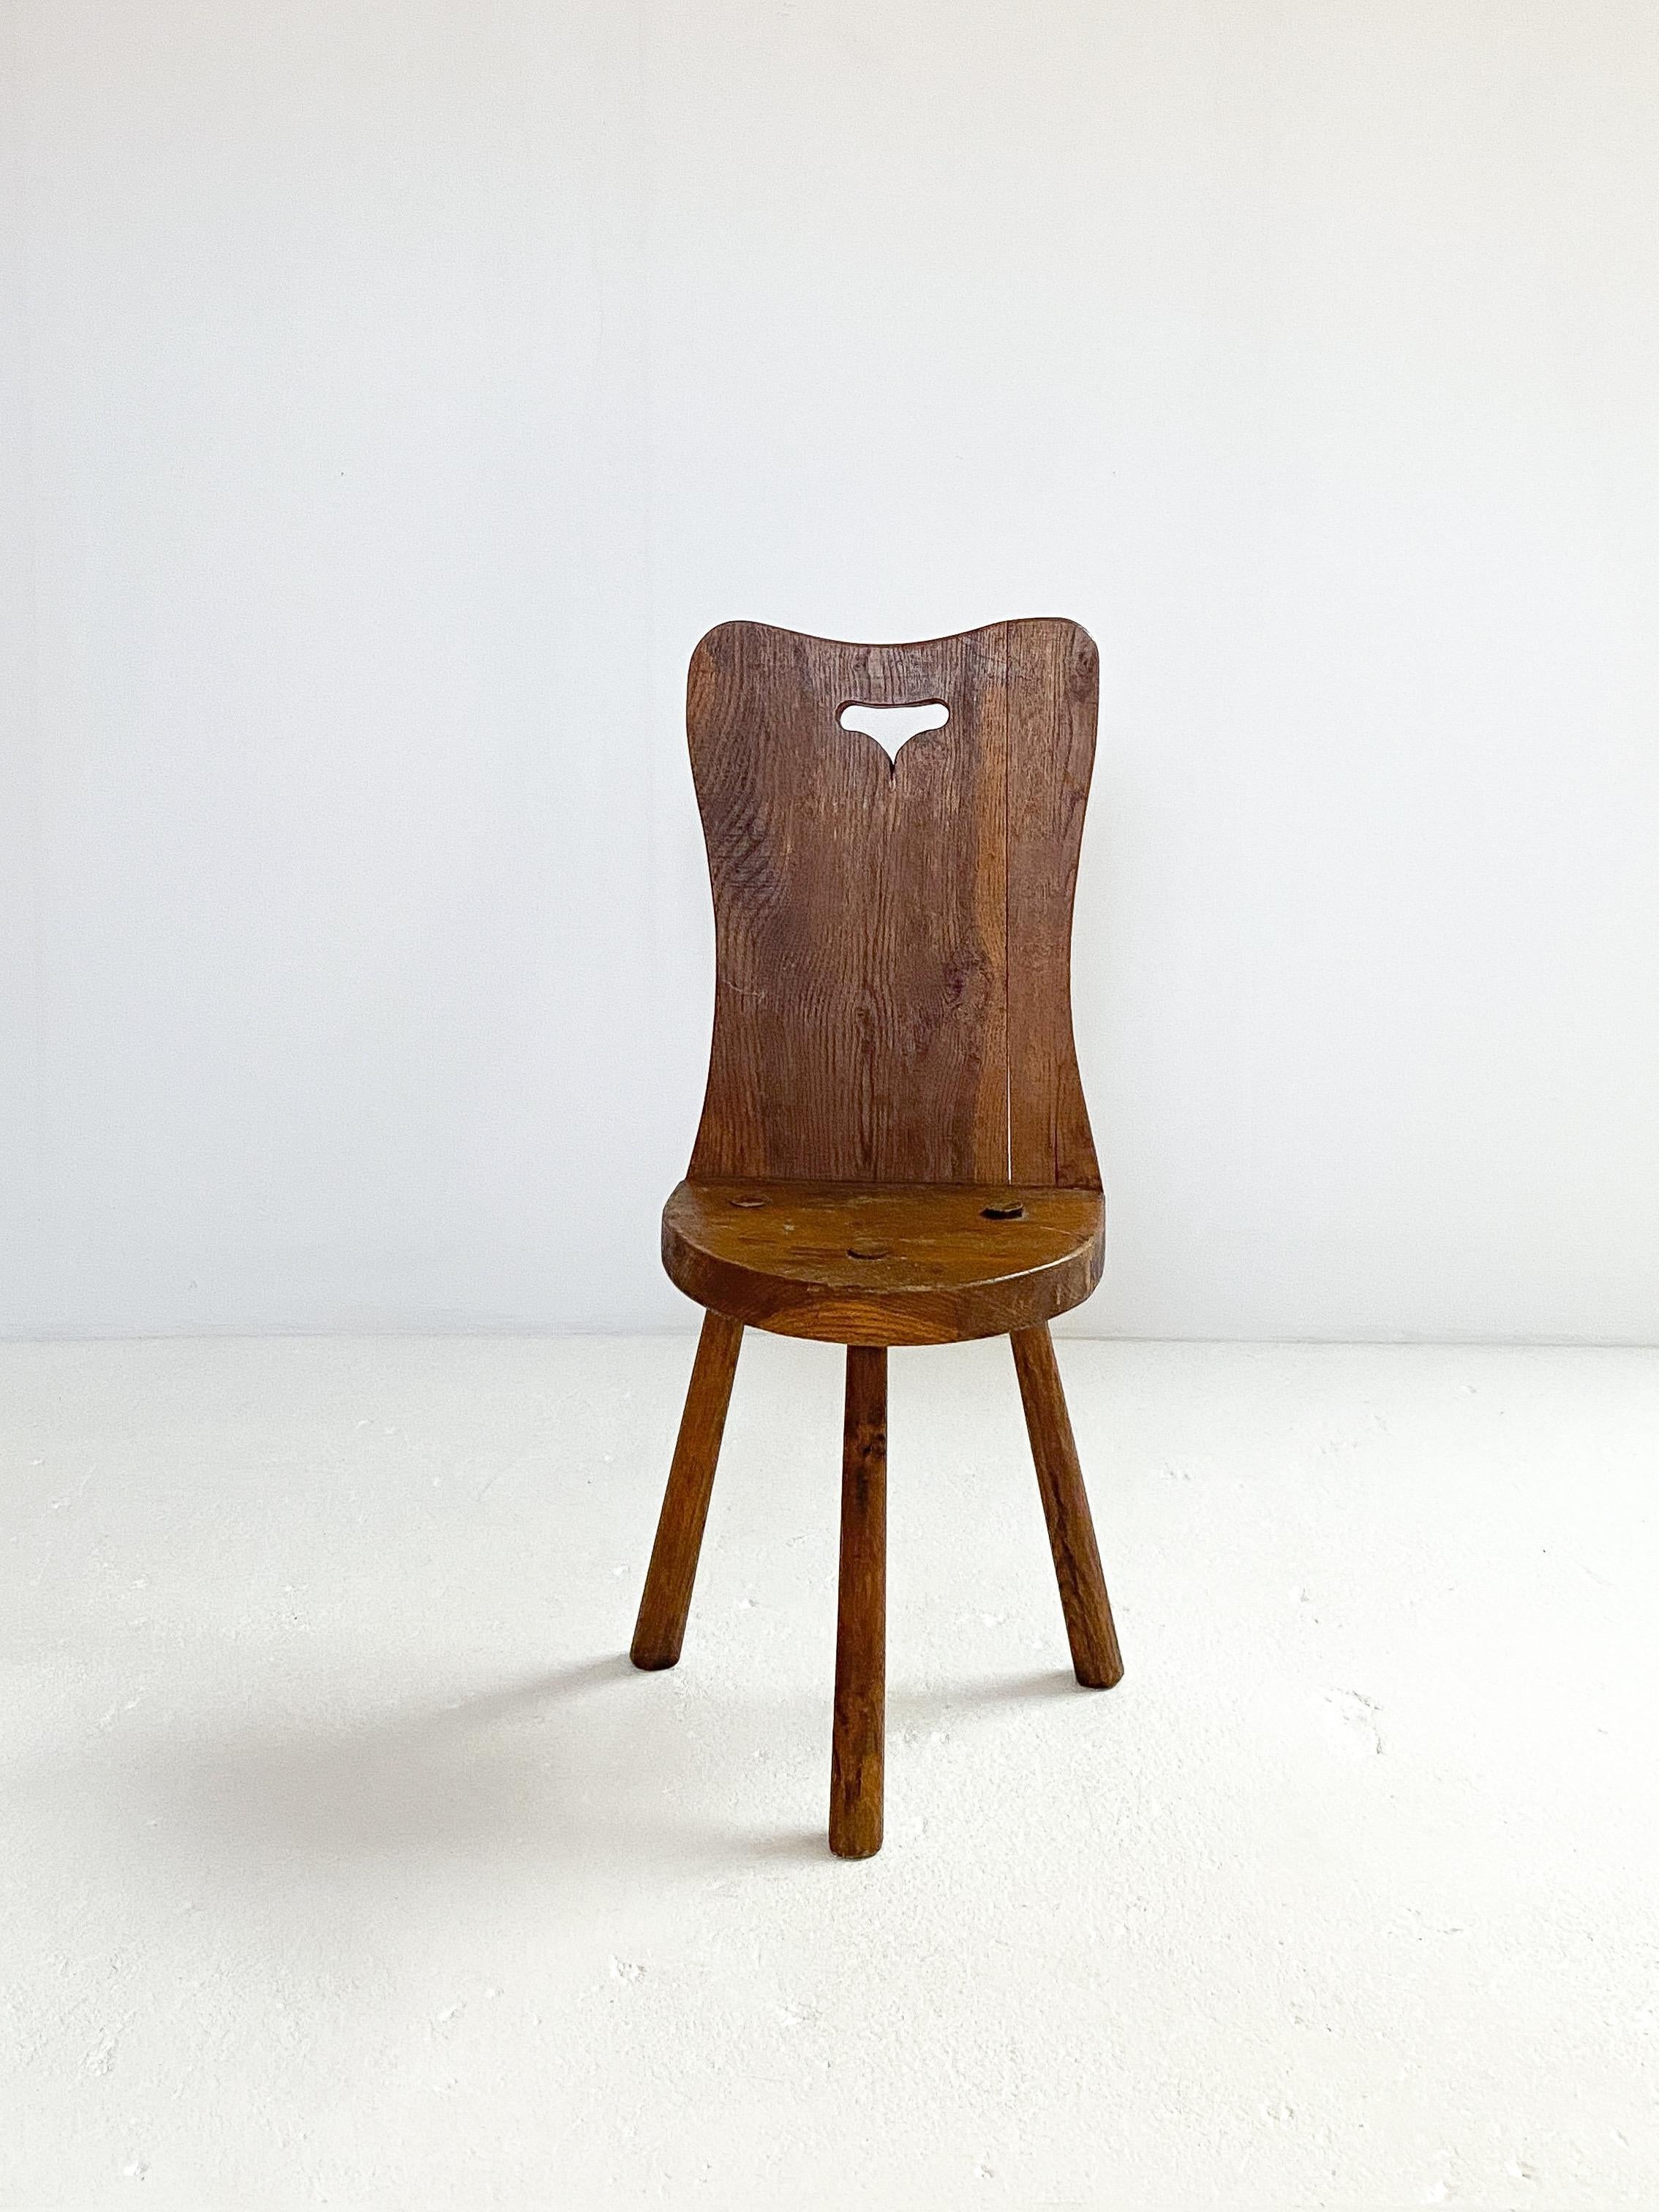 Brutalist wooden tripod stool made in France, circa 1950s. 
Substantial and chunky seat with sturdy legs. This stool has an impressive hart shaped back with a half moon shaped seat with great character and lines. Darkened patina and grain to the